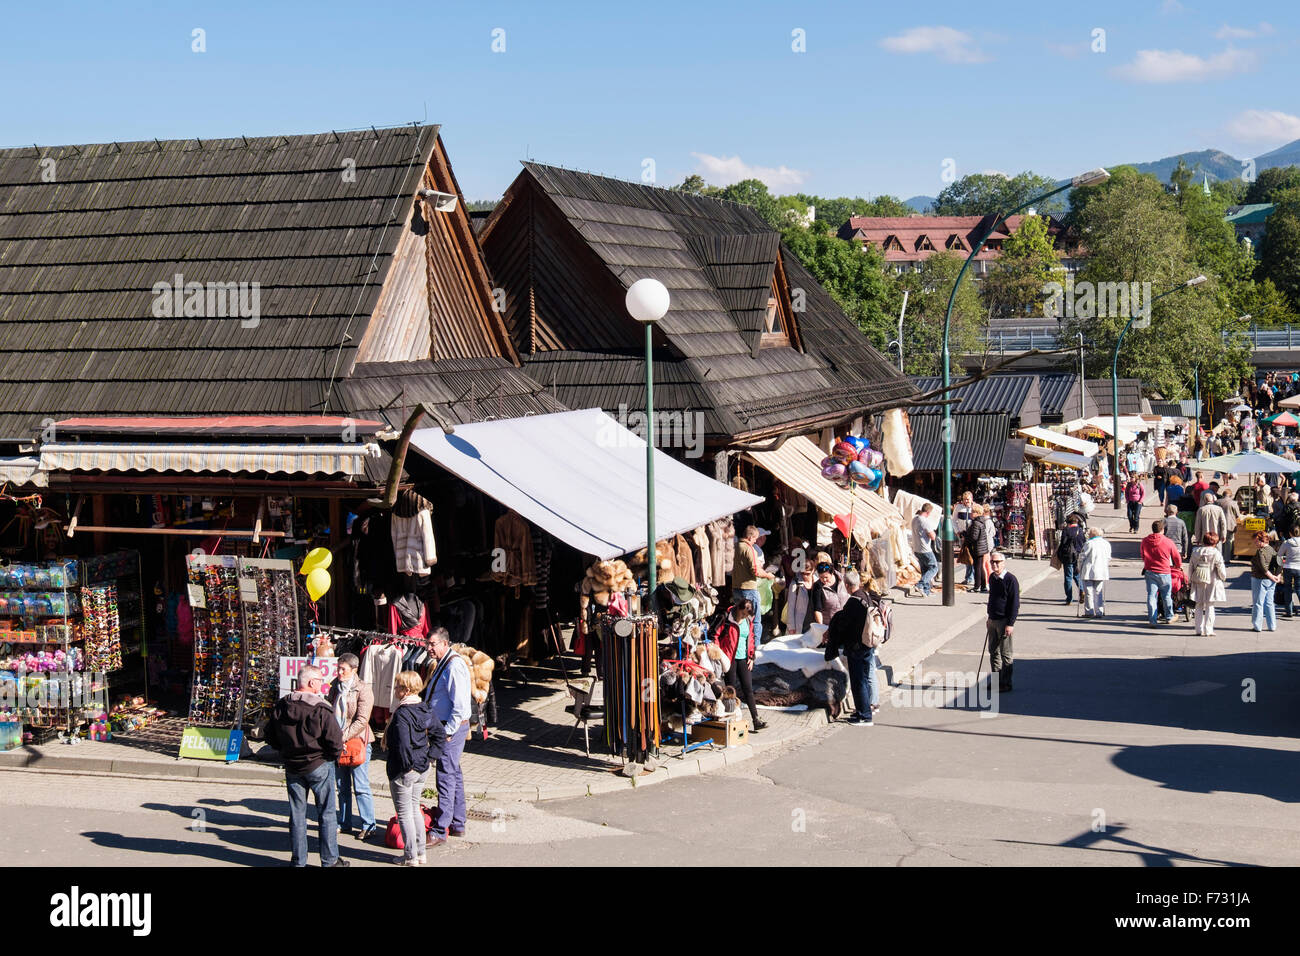 High view of shops and stalls in market with crowd of shoppers on Krupowki Street, Zakopane, Tatra County, Poland, Europe Stock Photo